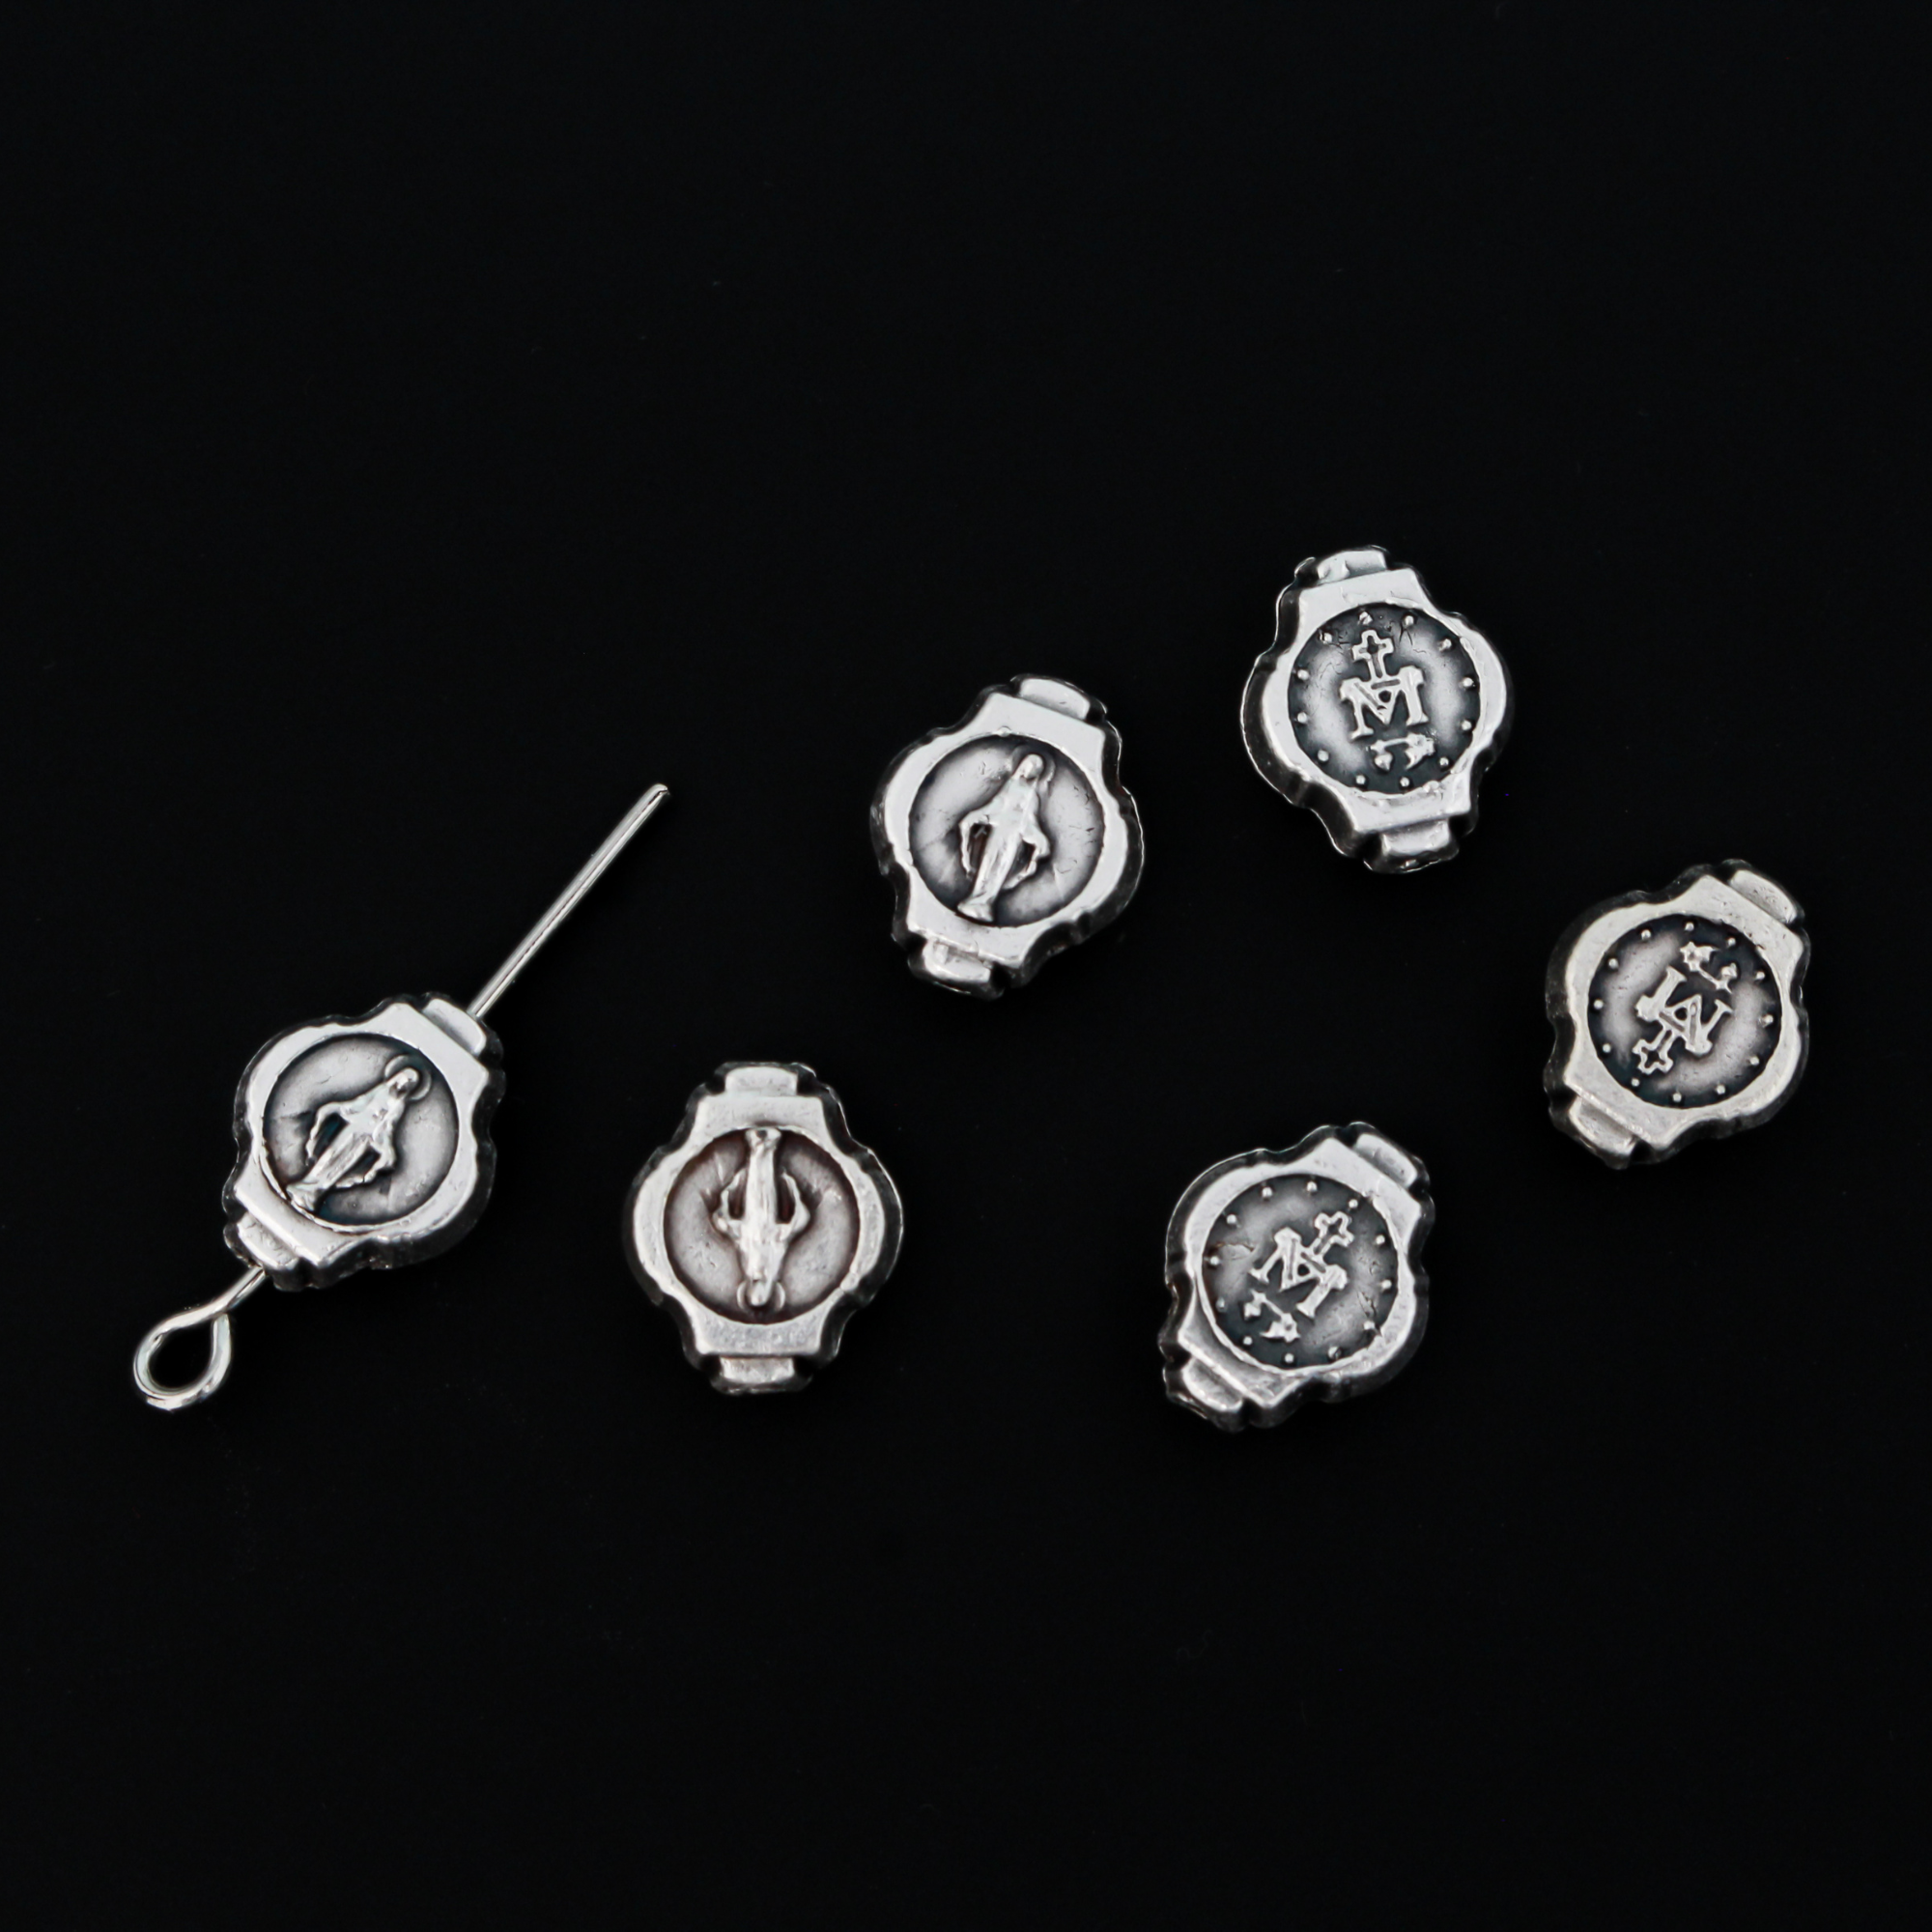 Miraculous Medal oval beads that are silver oxidized base metal made in Italy.